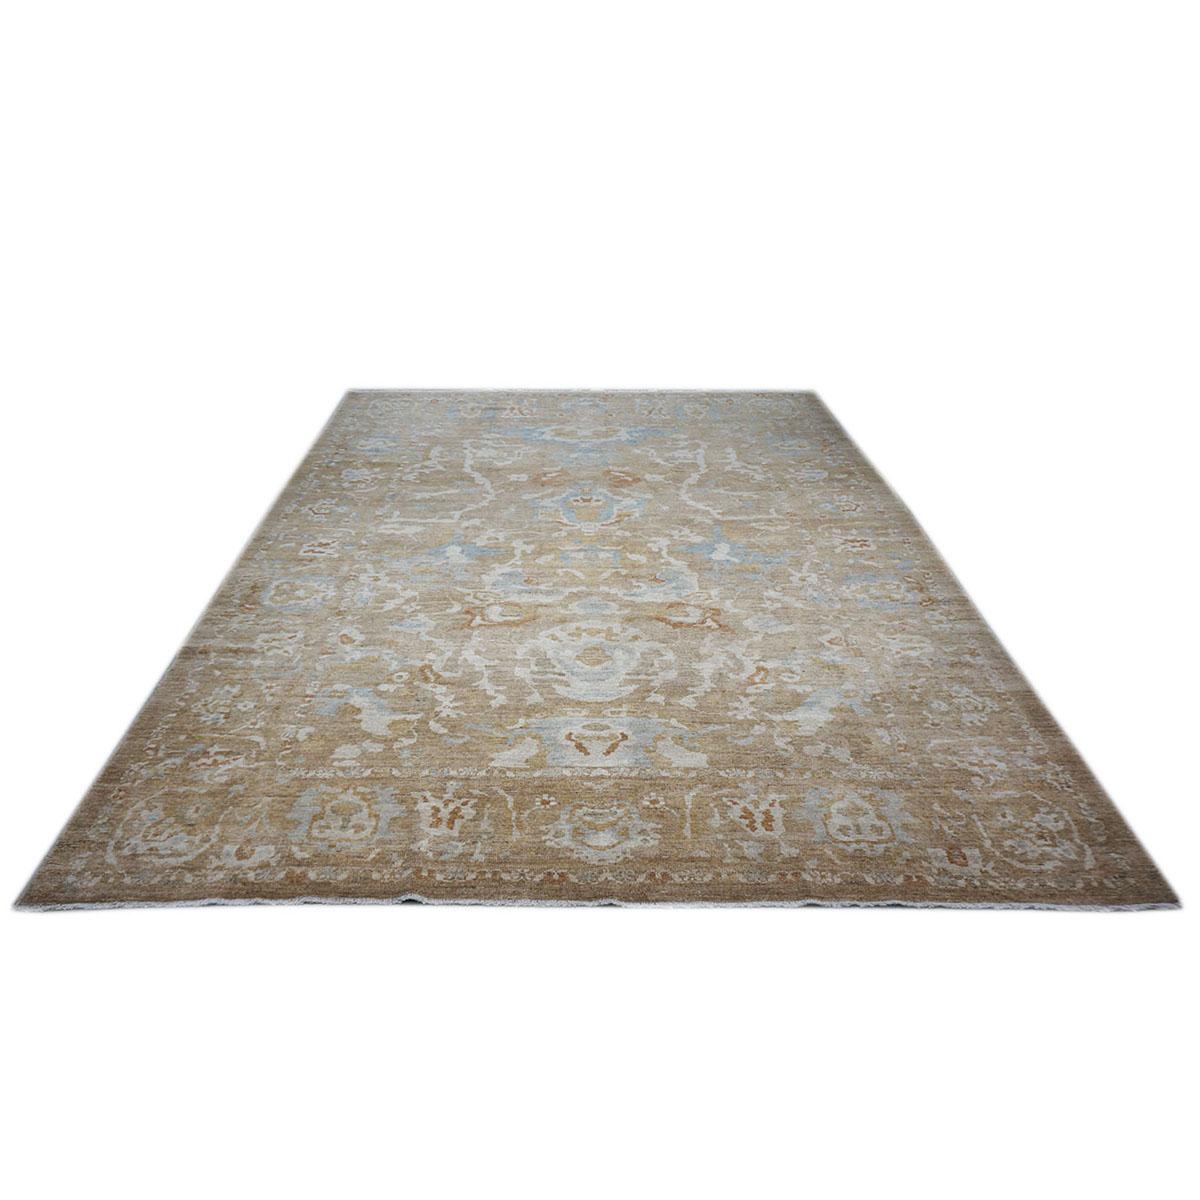 Ashly Fine Rugs presents an antique recreation of an original Persian Sultanabad room-sized area rug. Part of our own previous production, this antique recreation was thought of and created in-house and handmade in Persia by our master weavers. This